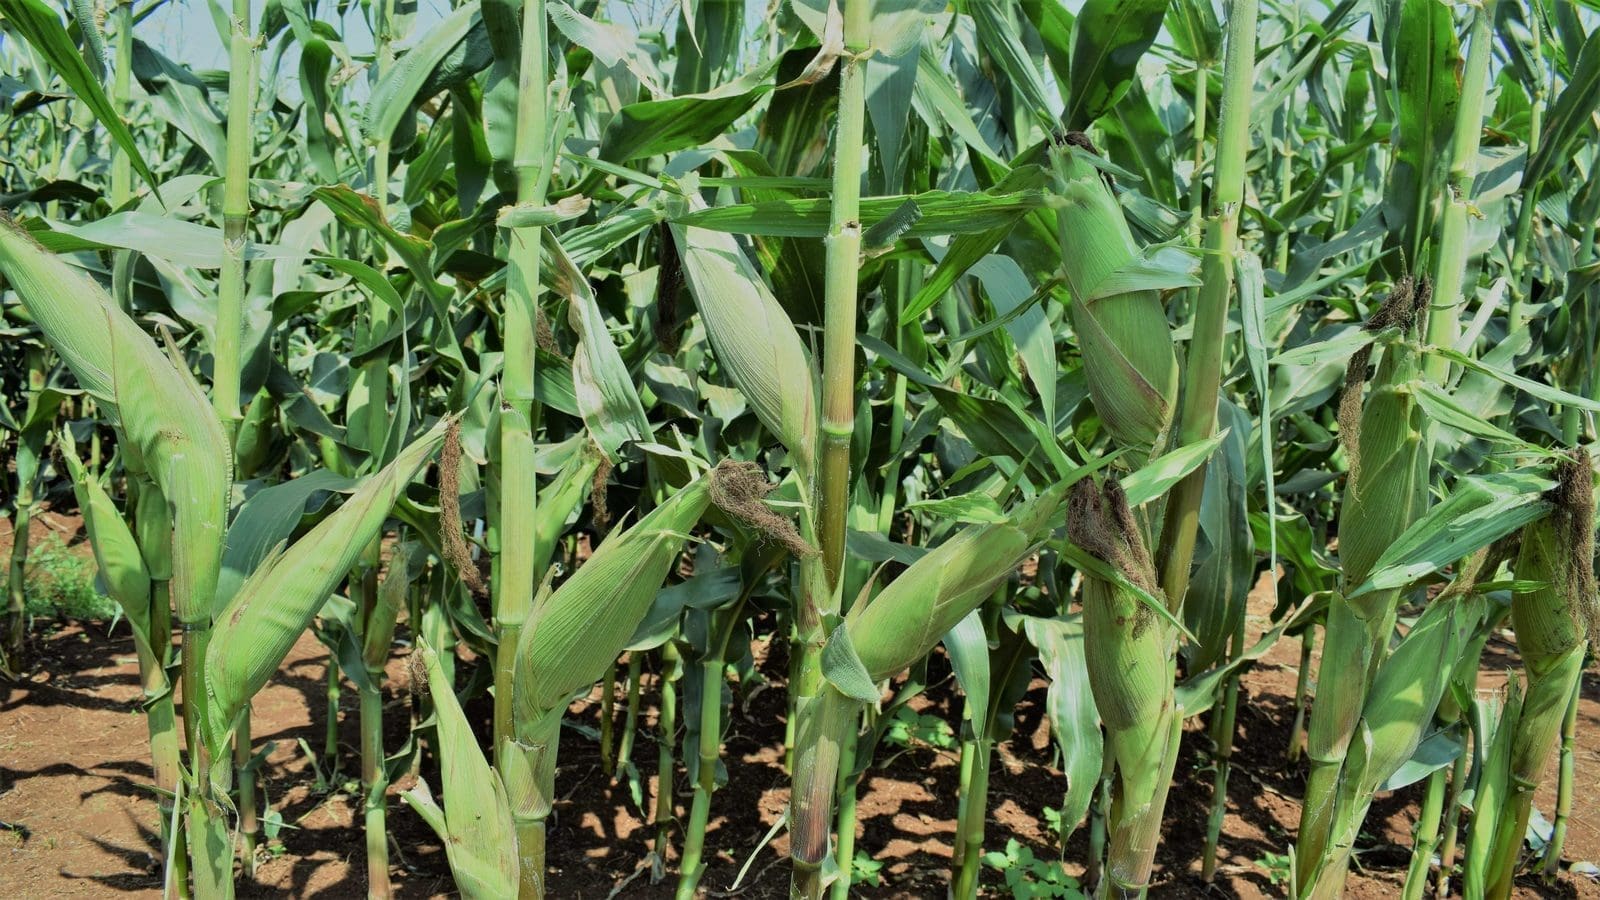 Belgium consents new field trials for gene-edited maize